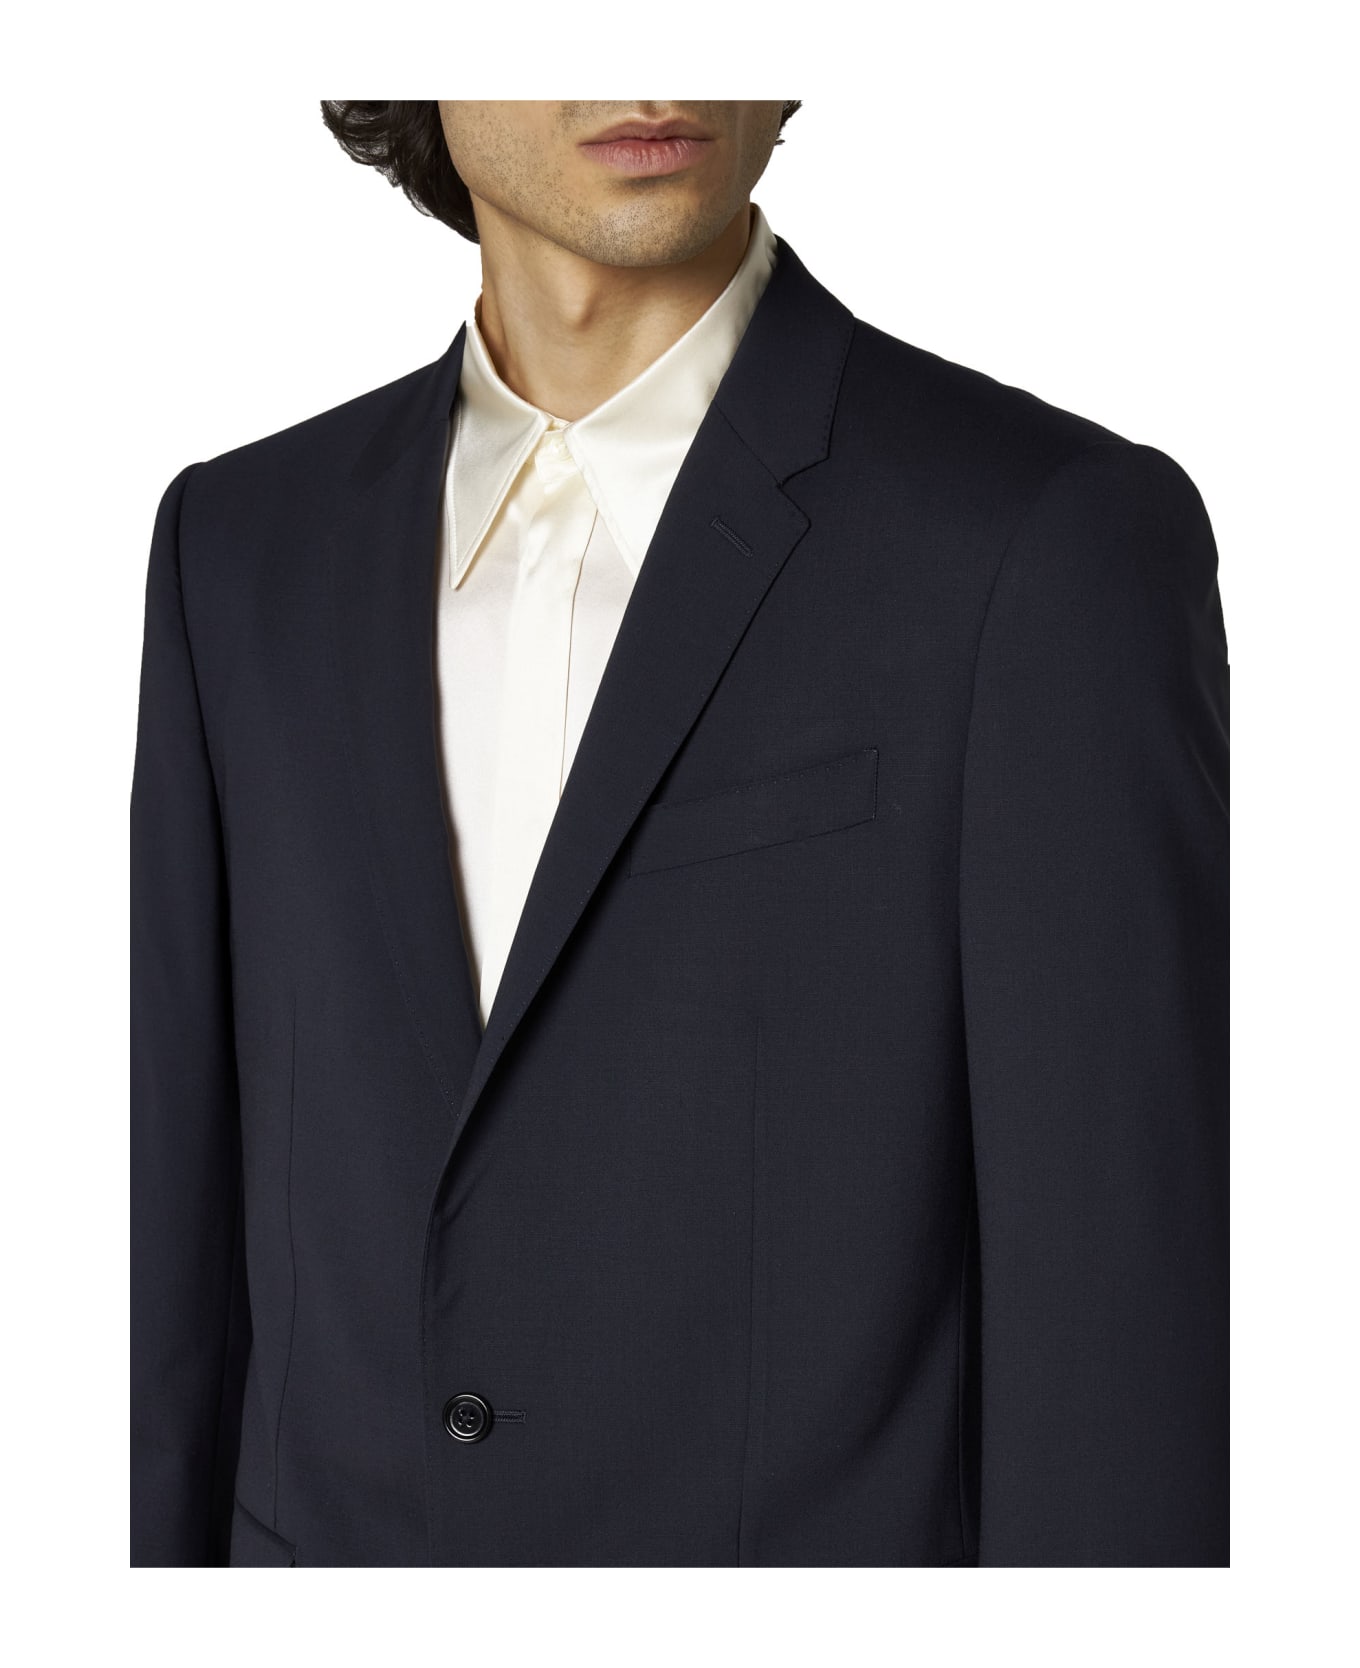 Dolce & Gabbana Suit - Dolce & Gabbana Single-breasted Wool Jacket With Logoed Buttons